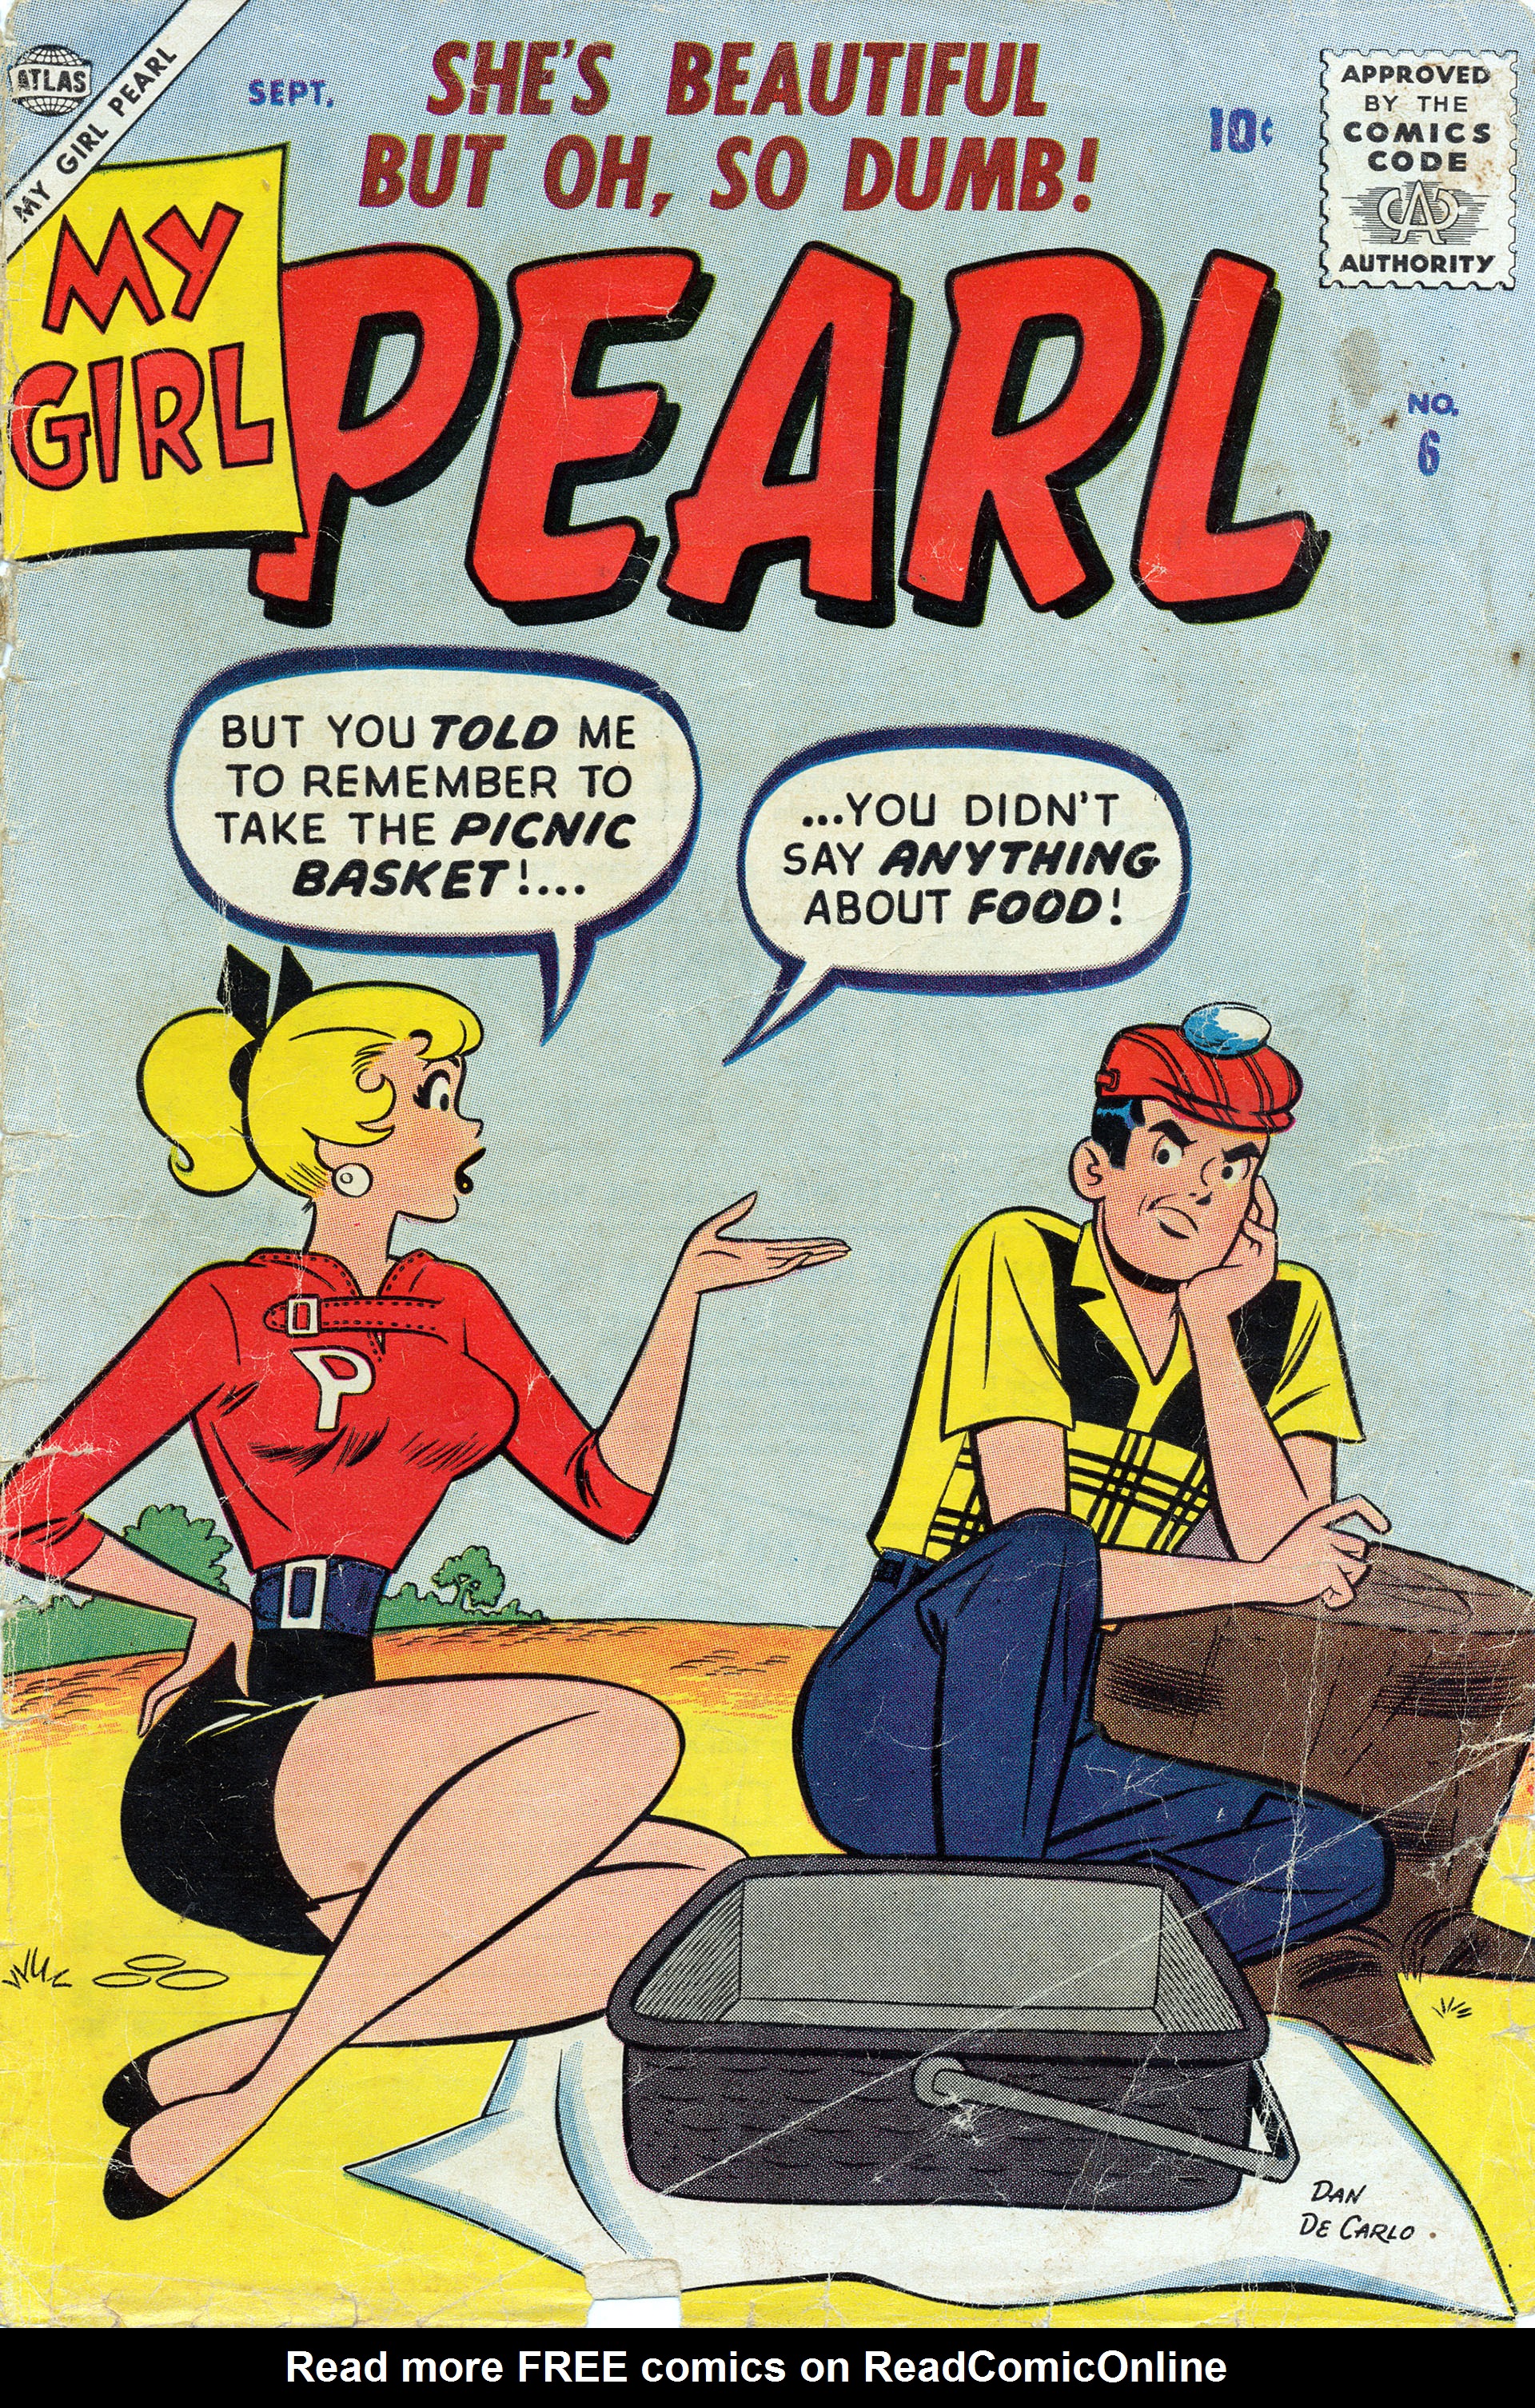 Read online My Girl Pearl comic -  Issue #6 - 1